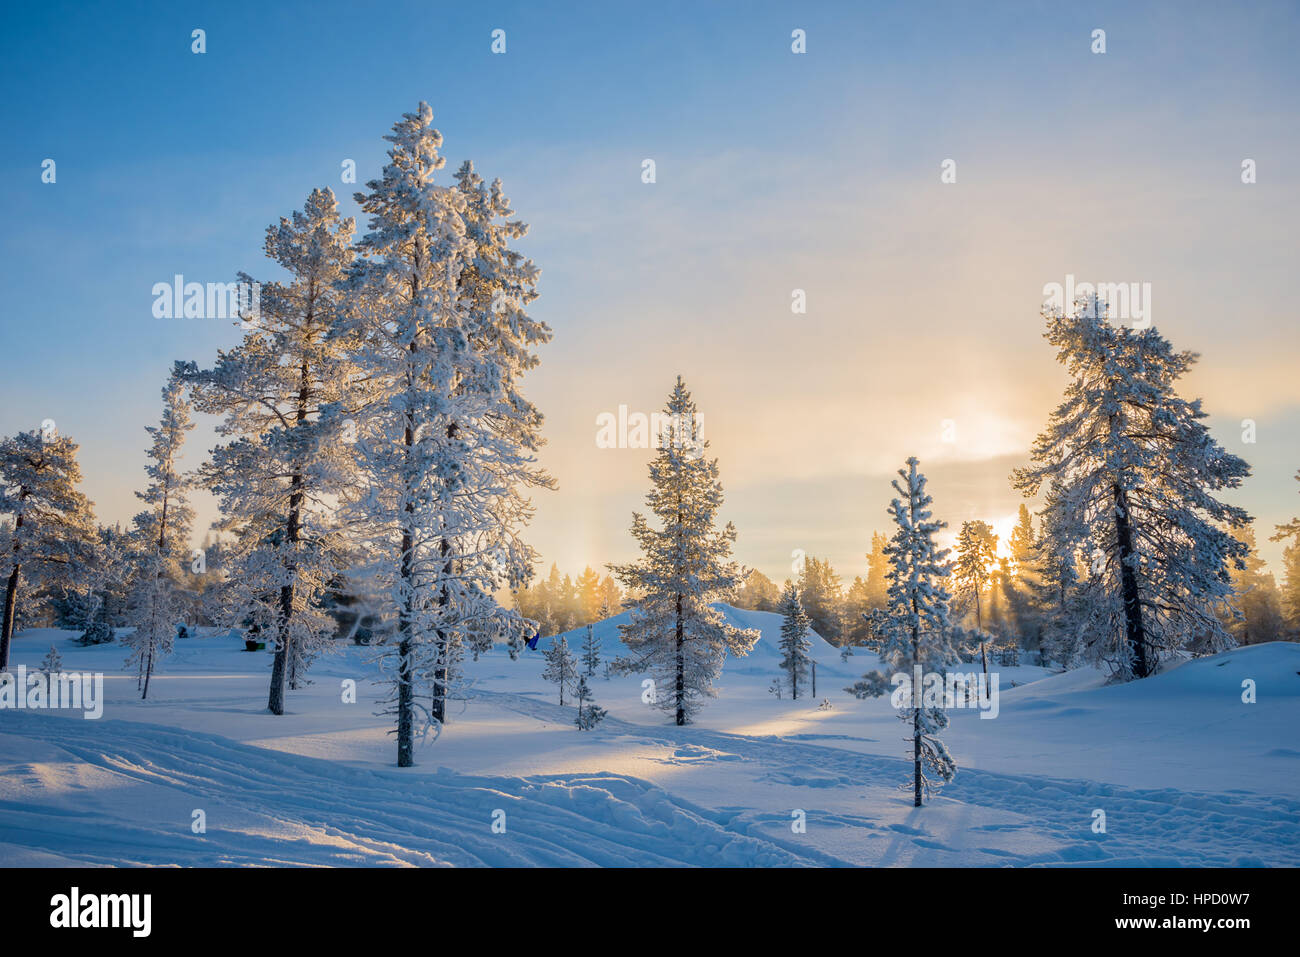 Winter landscape, Frosty trees in snowy forest at sunrise in Lapland, Finland Stock Photo